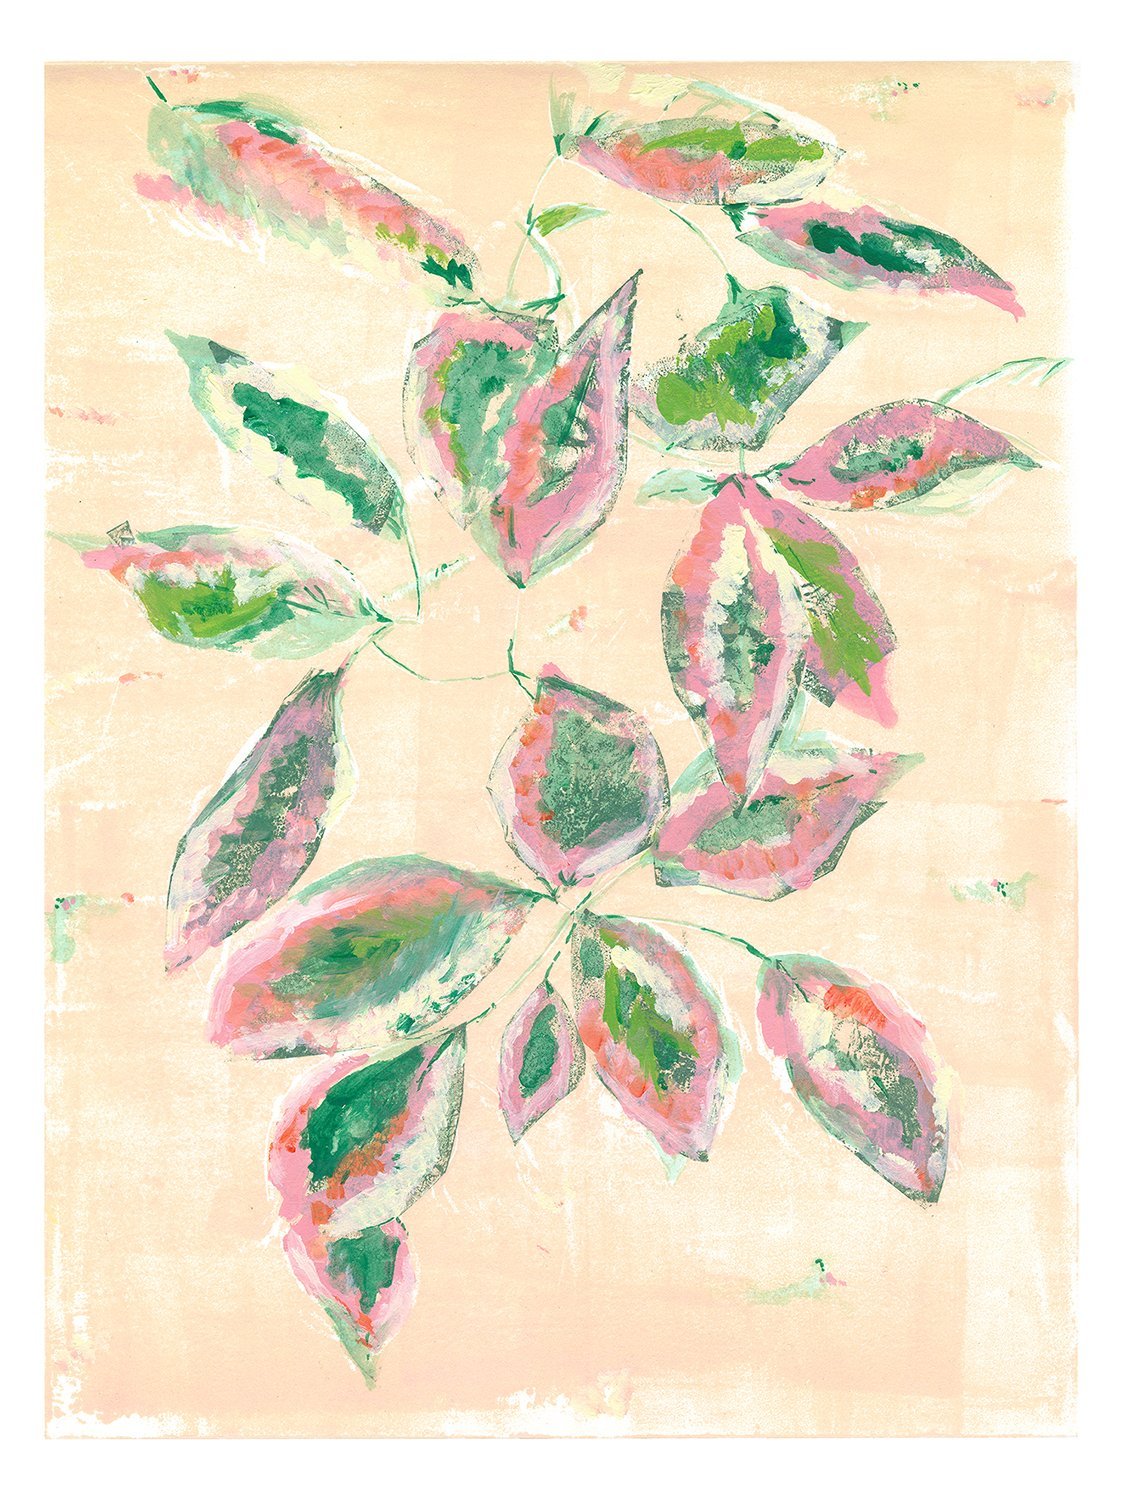   PINK FICUS  Monoprint   - BUY ME -   - CLICK TO VIEW FOLIAGE COLLECTION -    